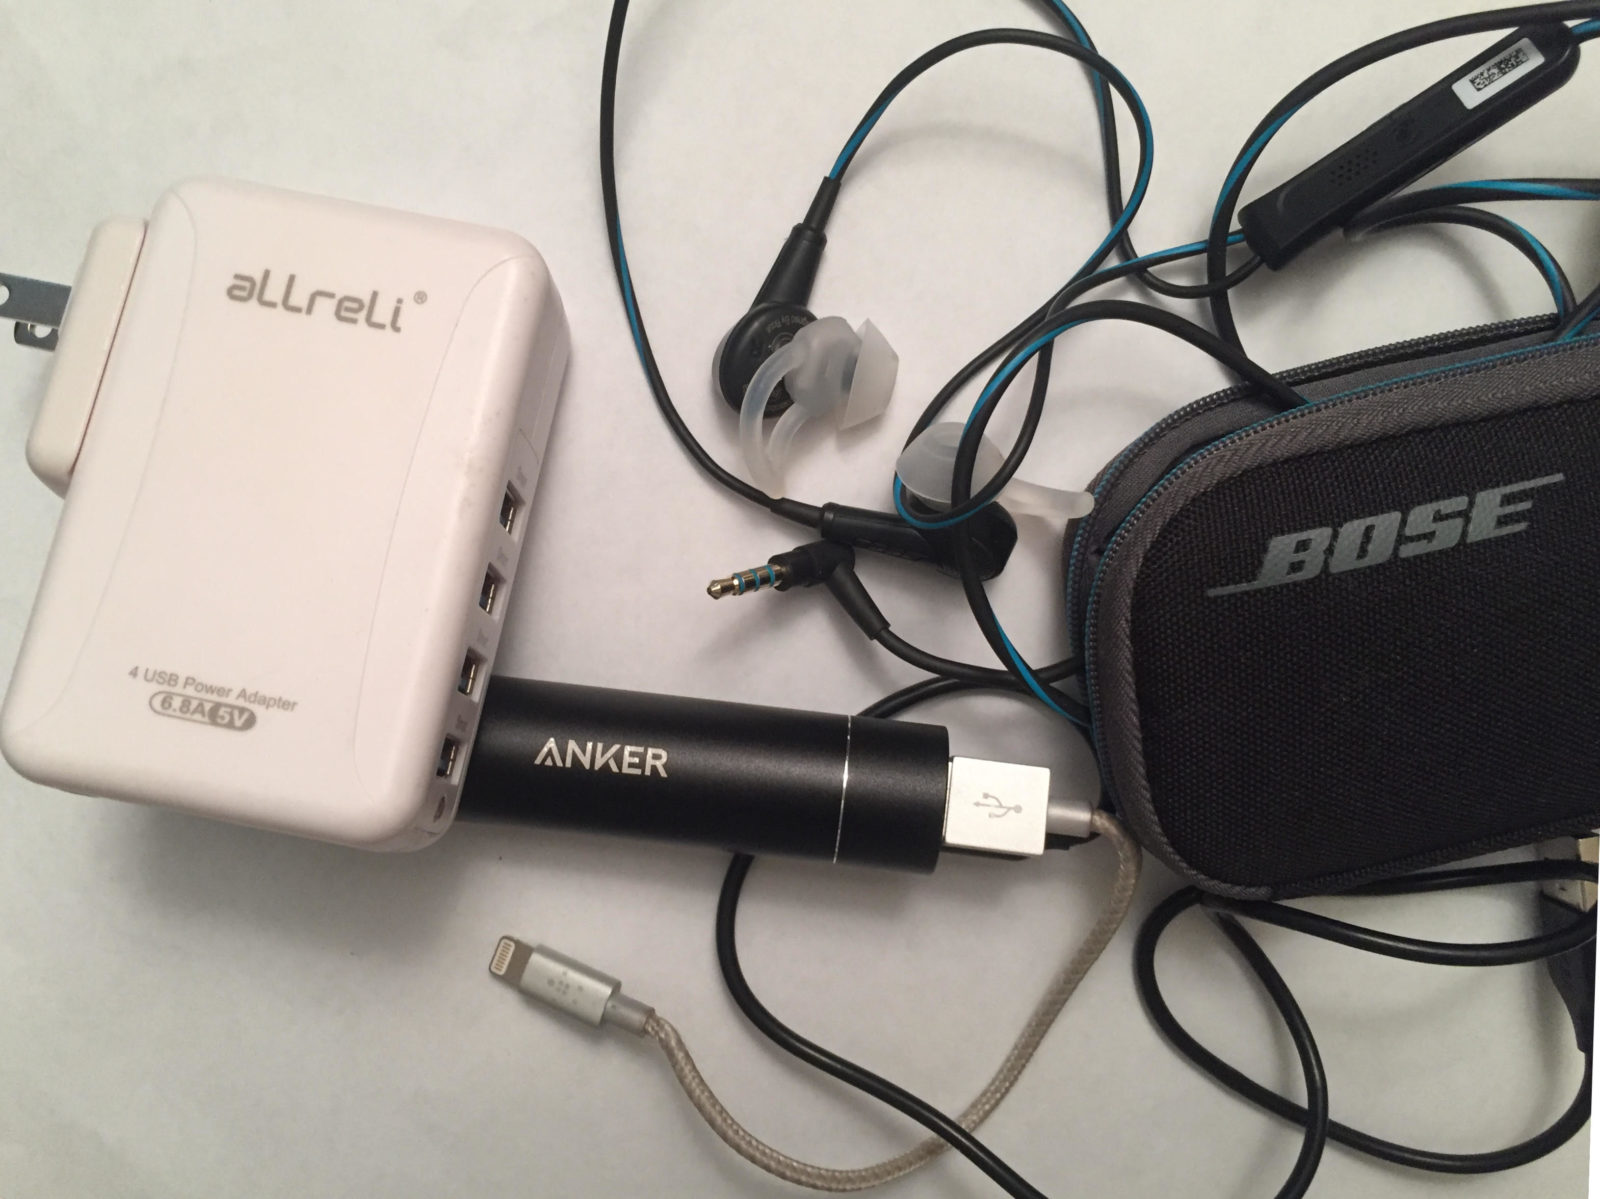 travel tech gear chargers and cords